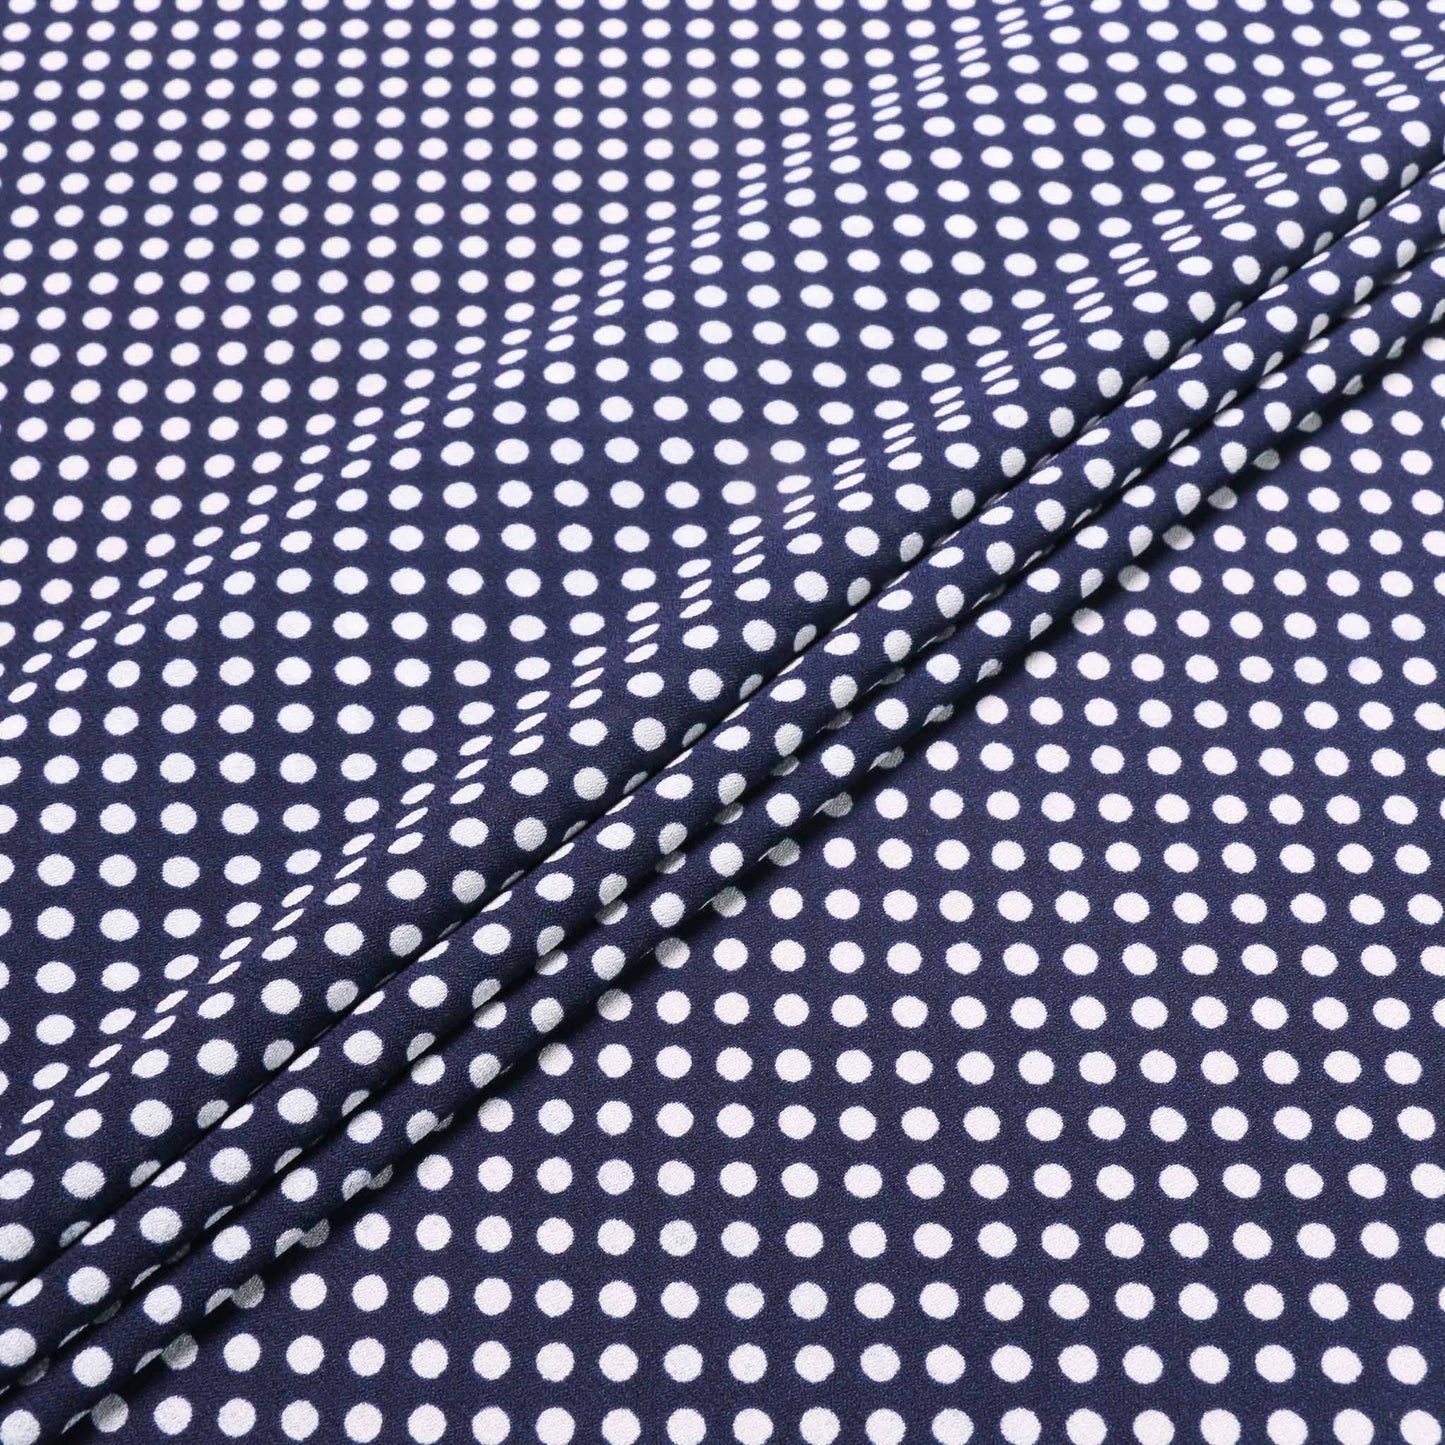 navy and white georgette fabric for dressmaking with polka dot design